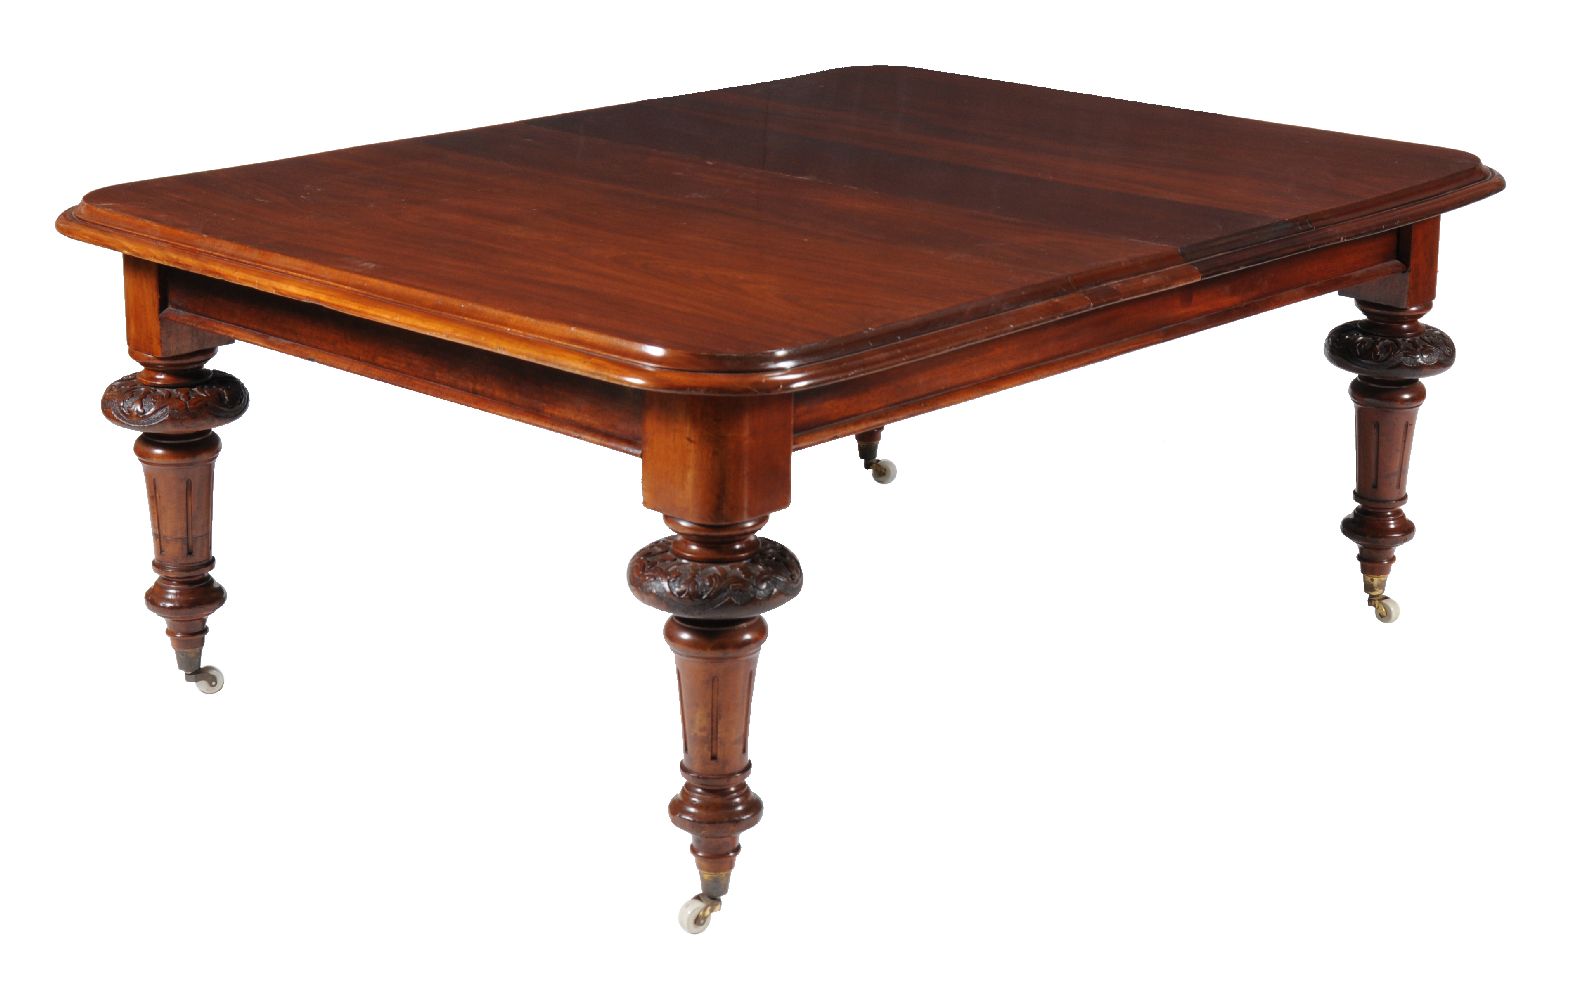 A Victorian mahogany extending dining table, circa 1860, with two additional leaf insertions, the